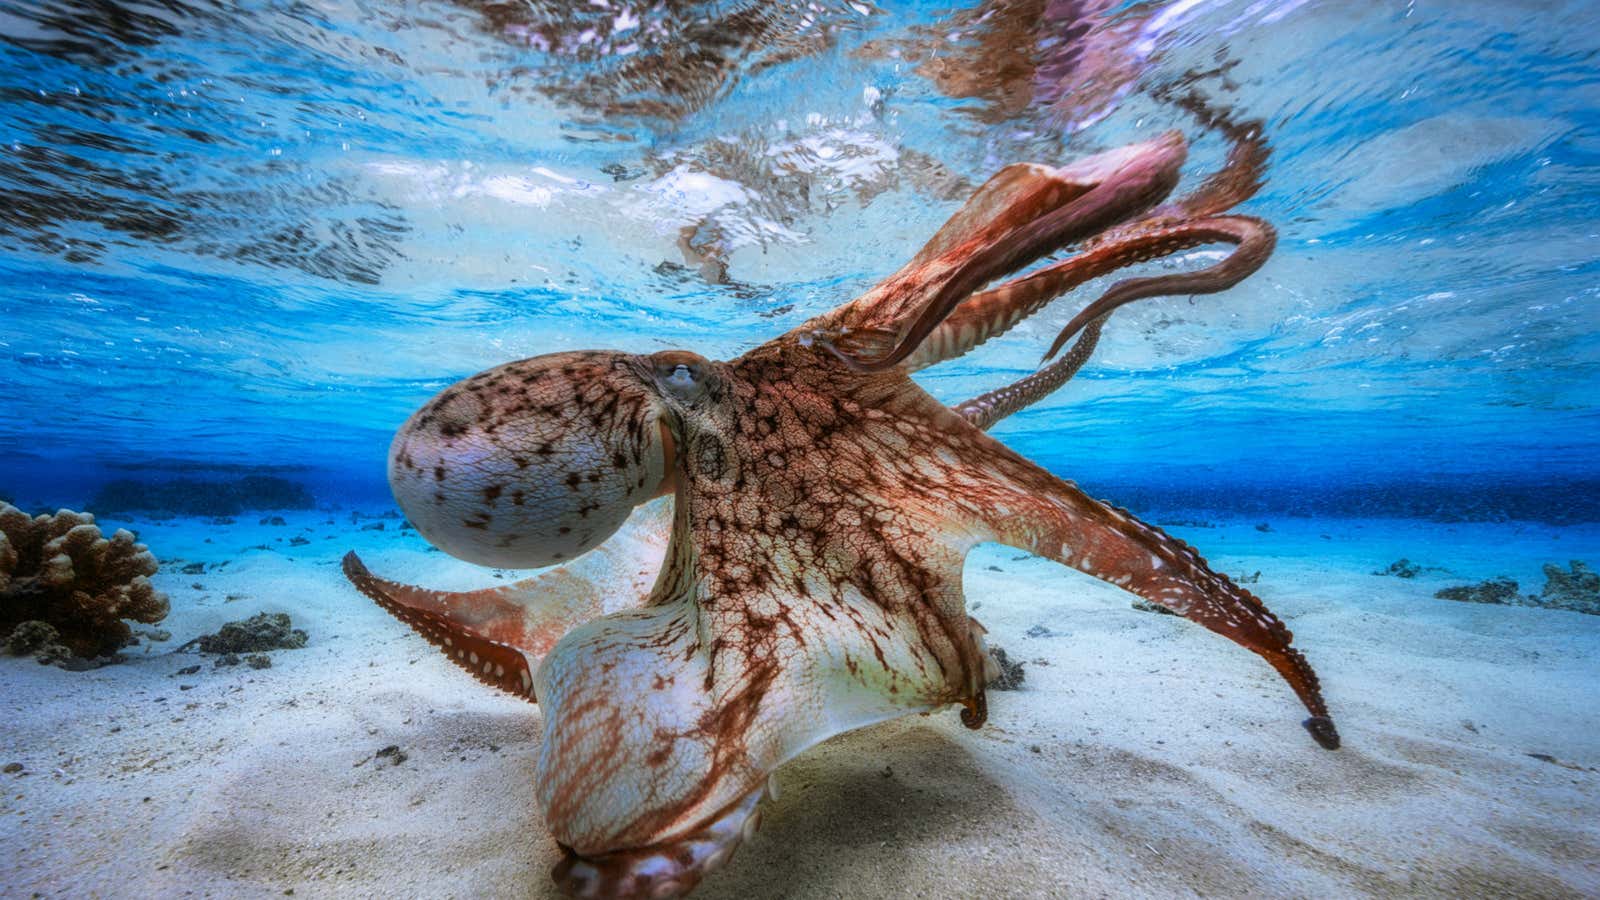 Winner, Underwater Photographer of the Year. From judge Alex Mustard: “Both balletic and malevolent, this image shows that the octopus means business as it hunts in a shallow lagoon. The way it moves is so different from any predator on land, this truly could be an alien from another world. A truly memorable creature, beautifully photographed.”